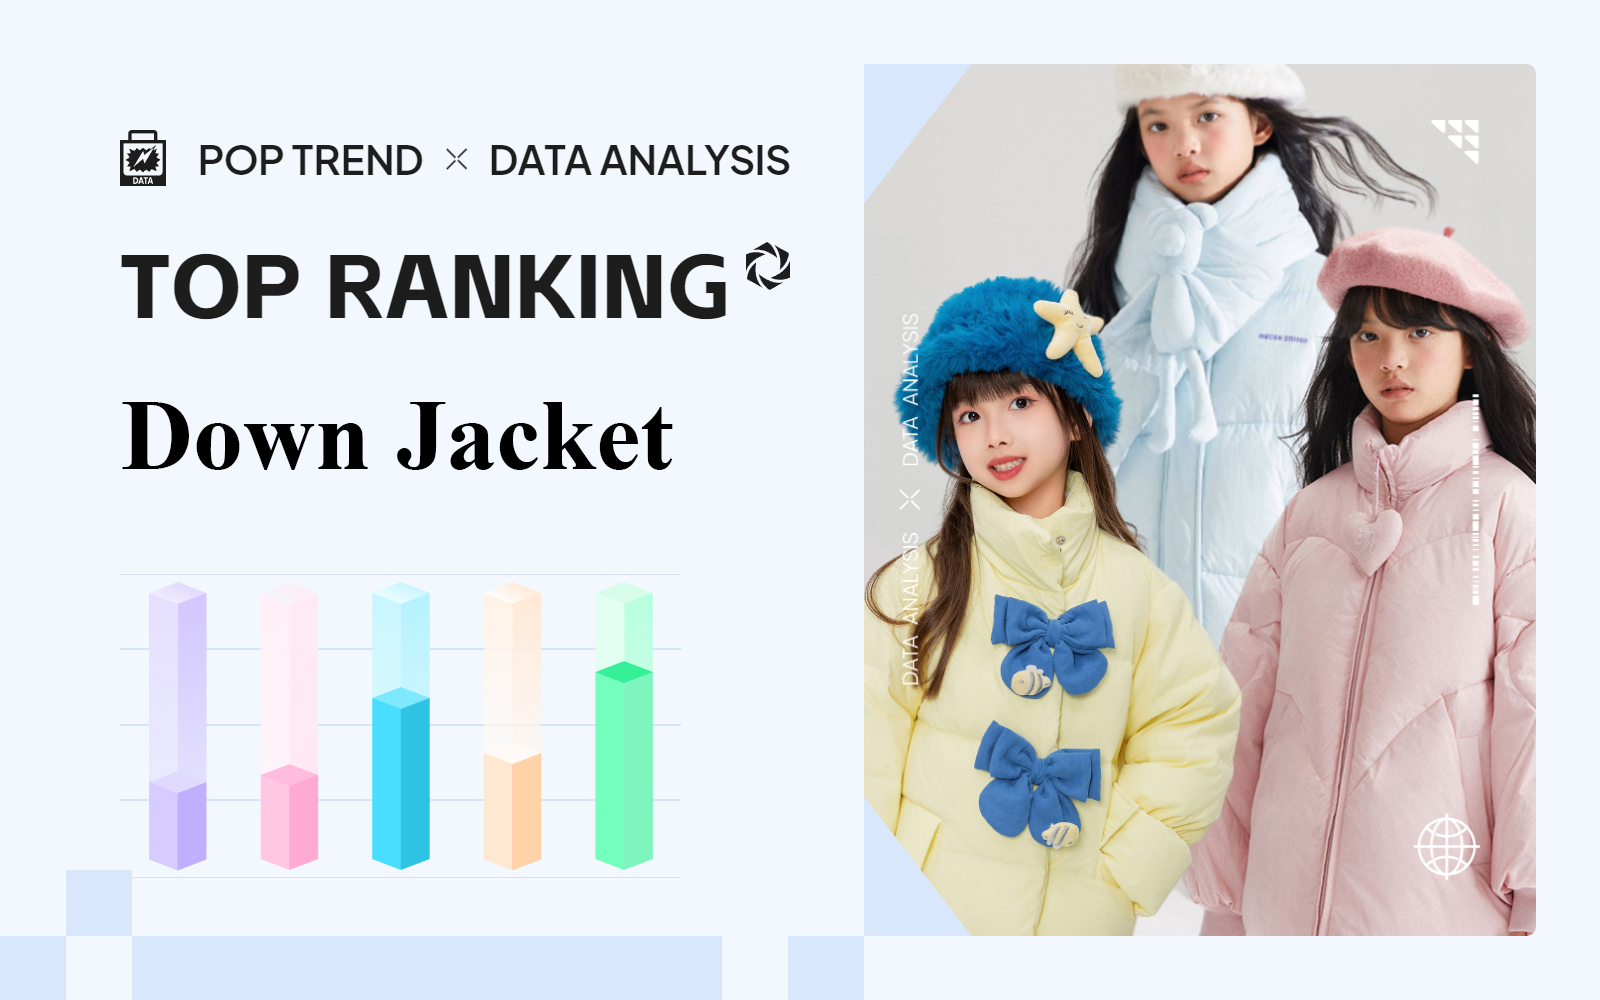 Down Jacket -- The TOP Ranking of Girlswear